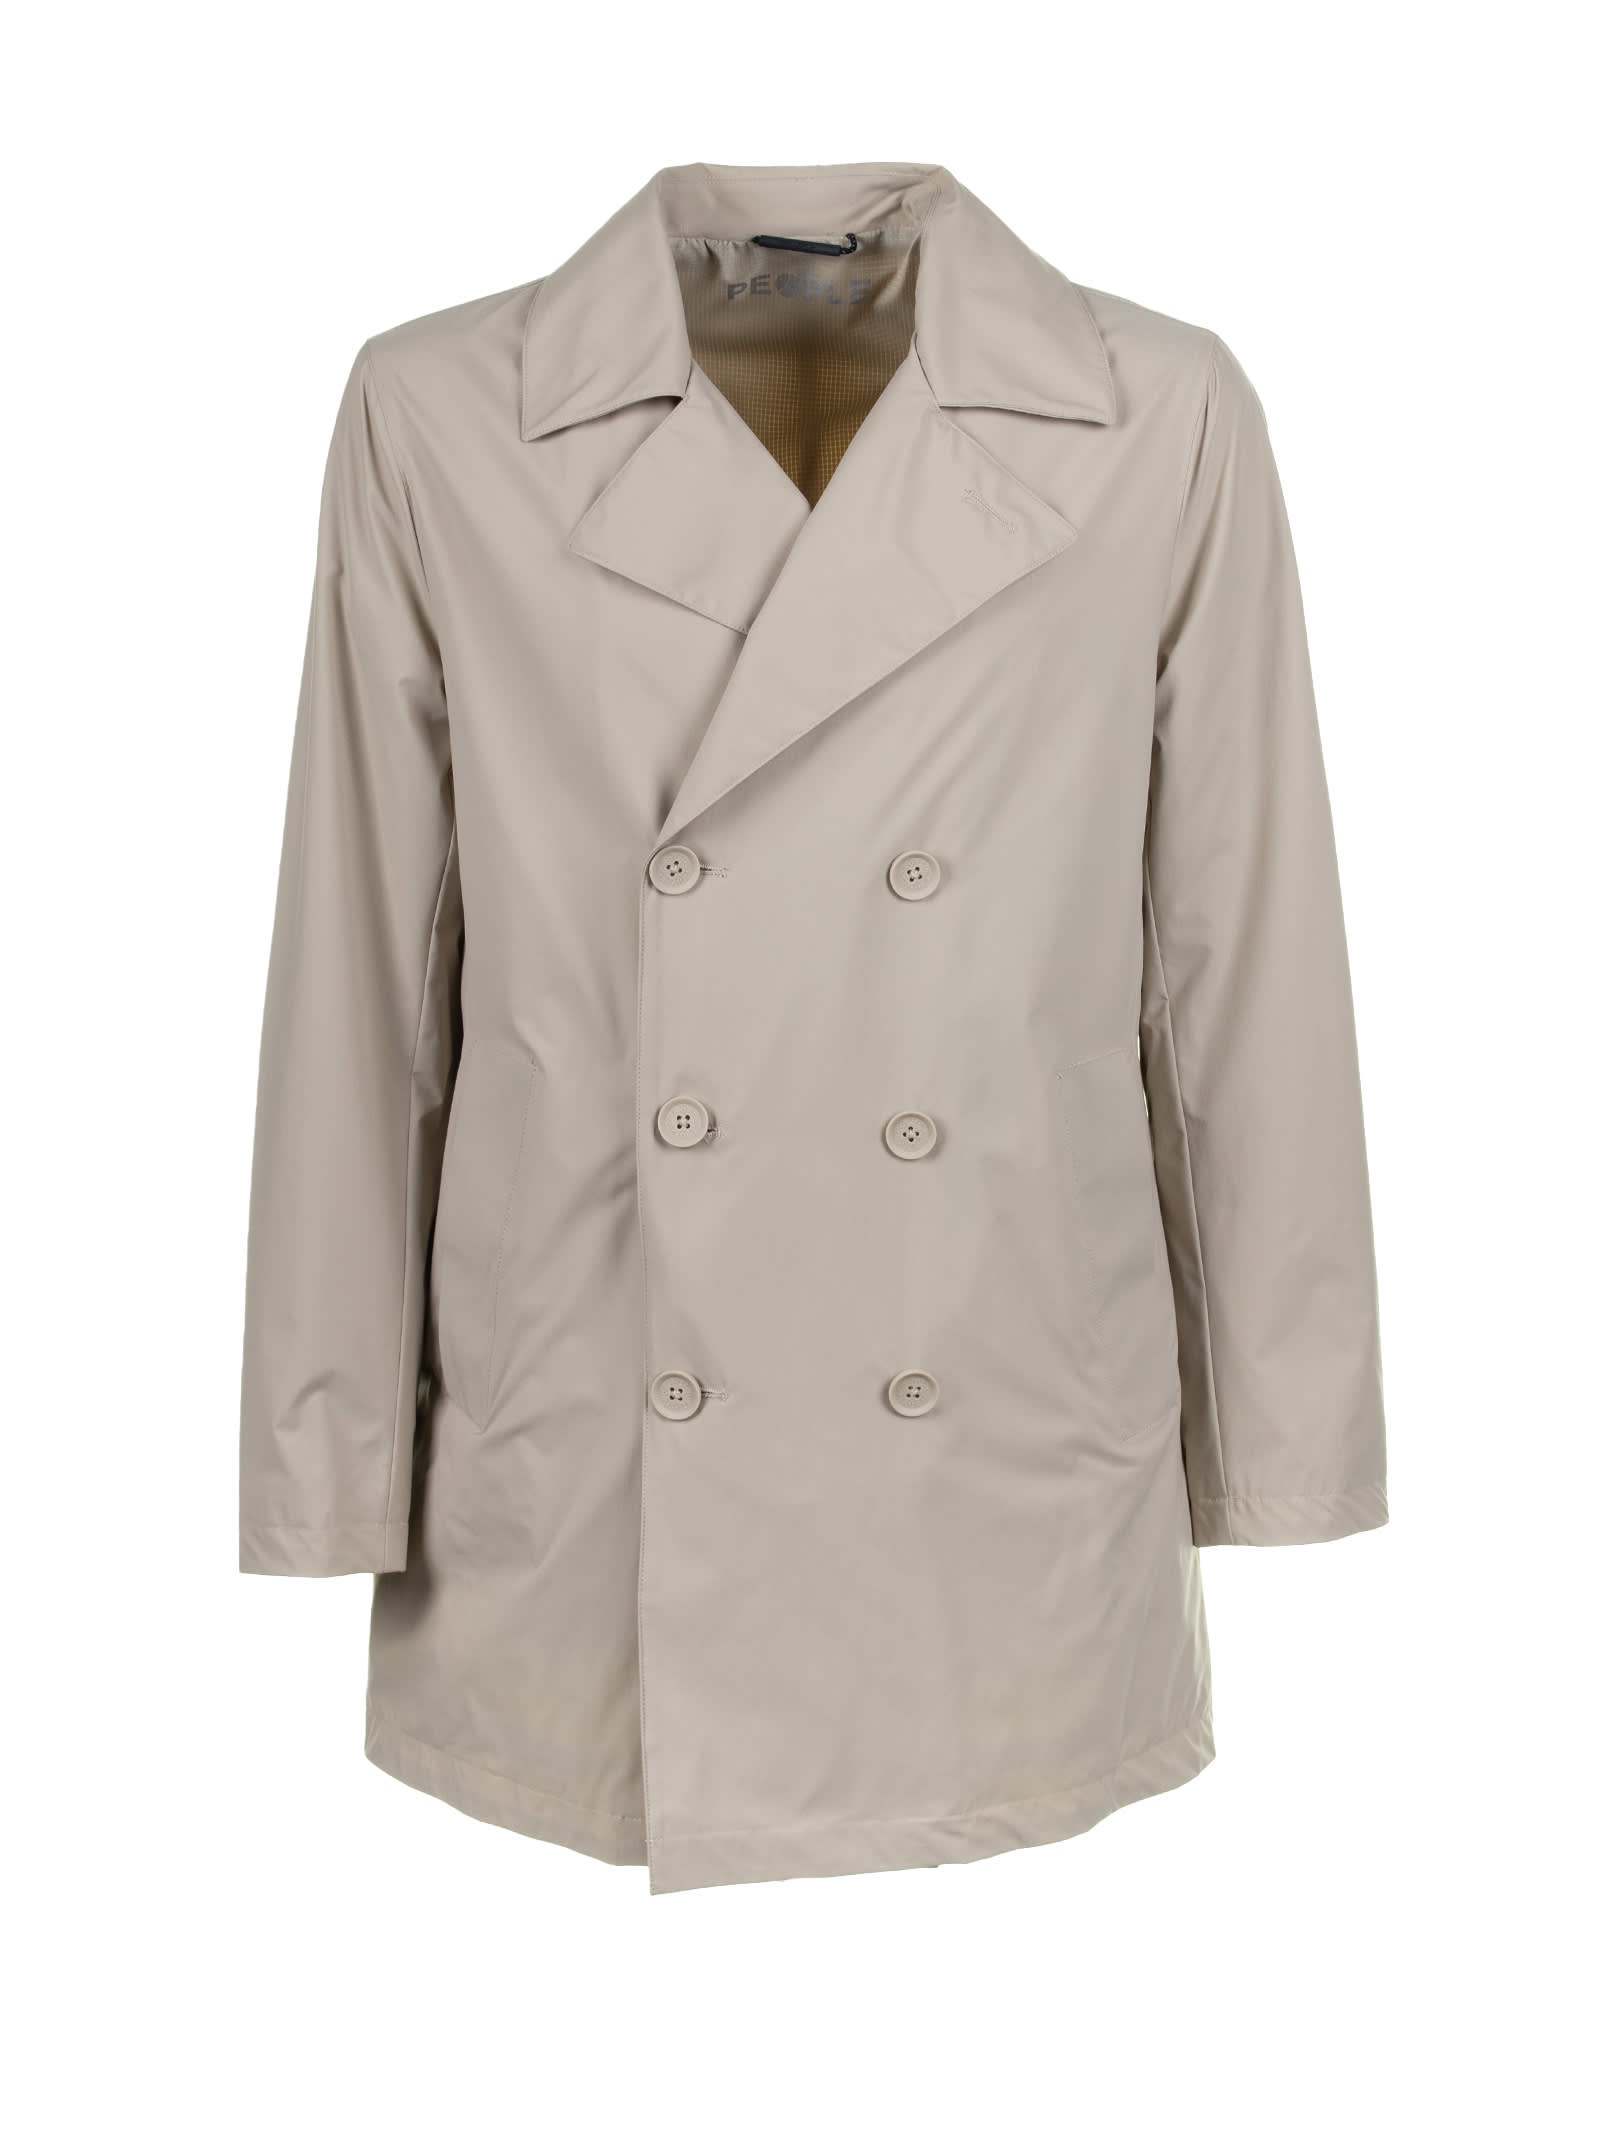 Beige Double-breasted Trench Coat